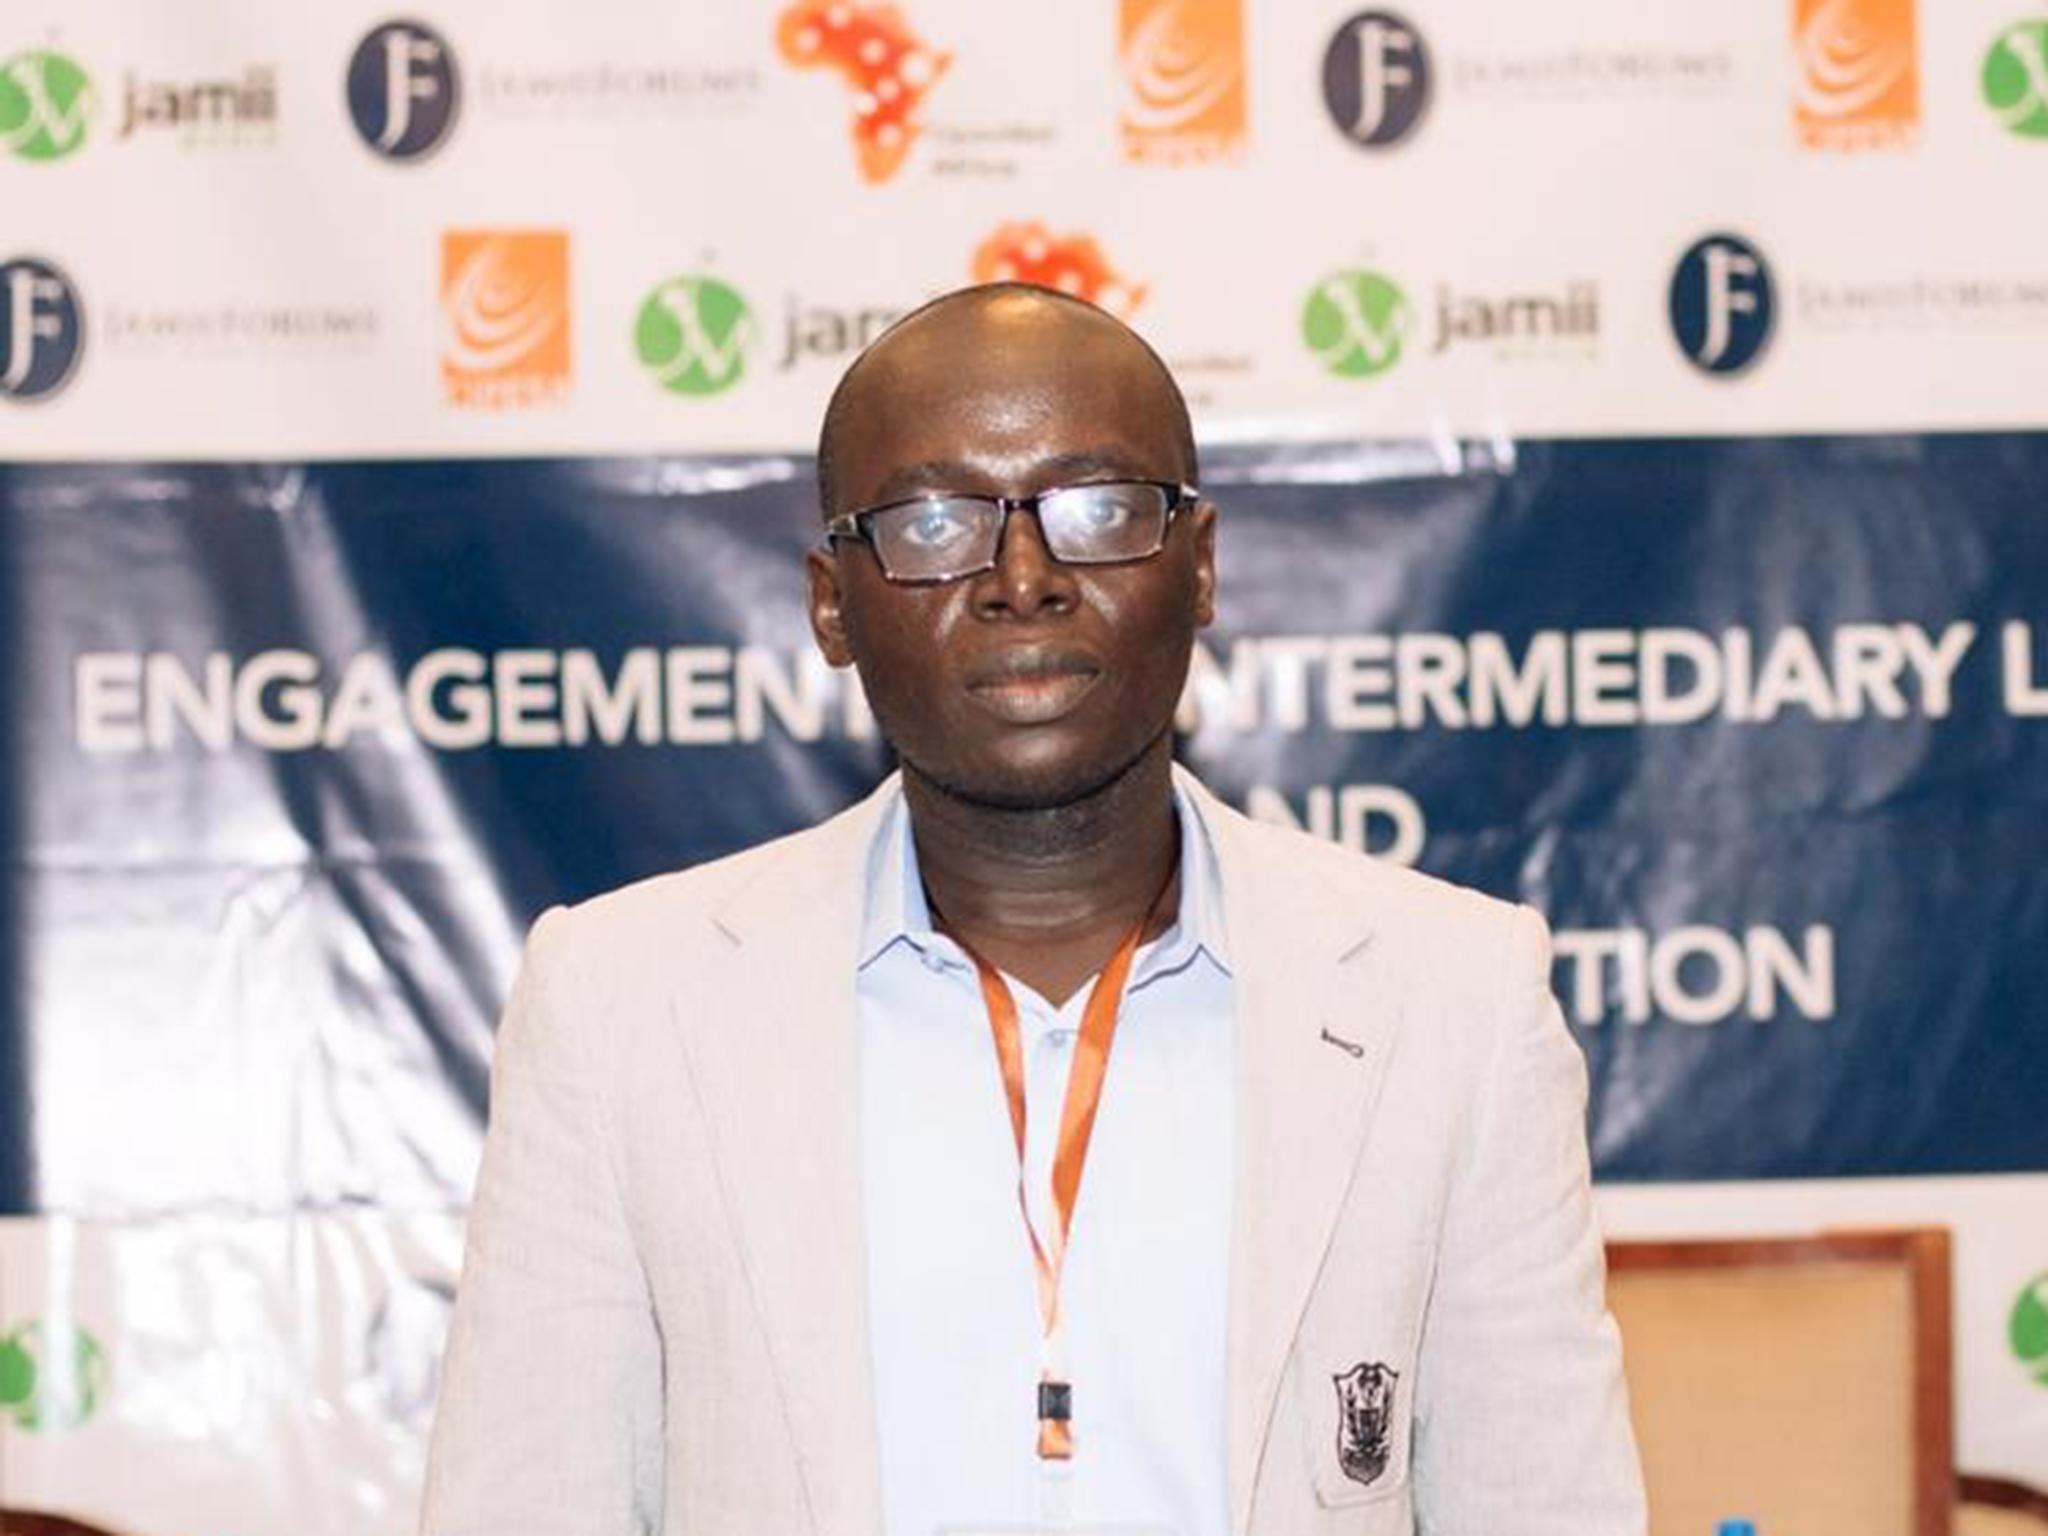 Erick Kabendera has written for a number of local and international publications